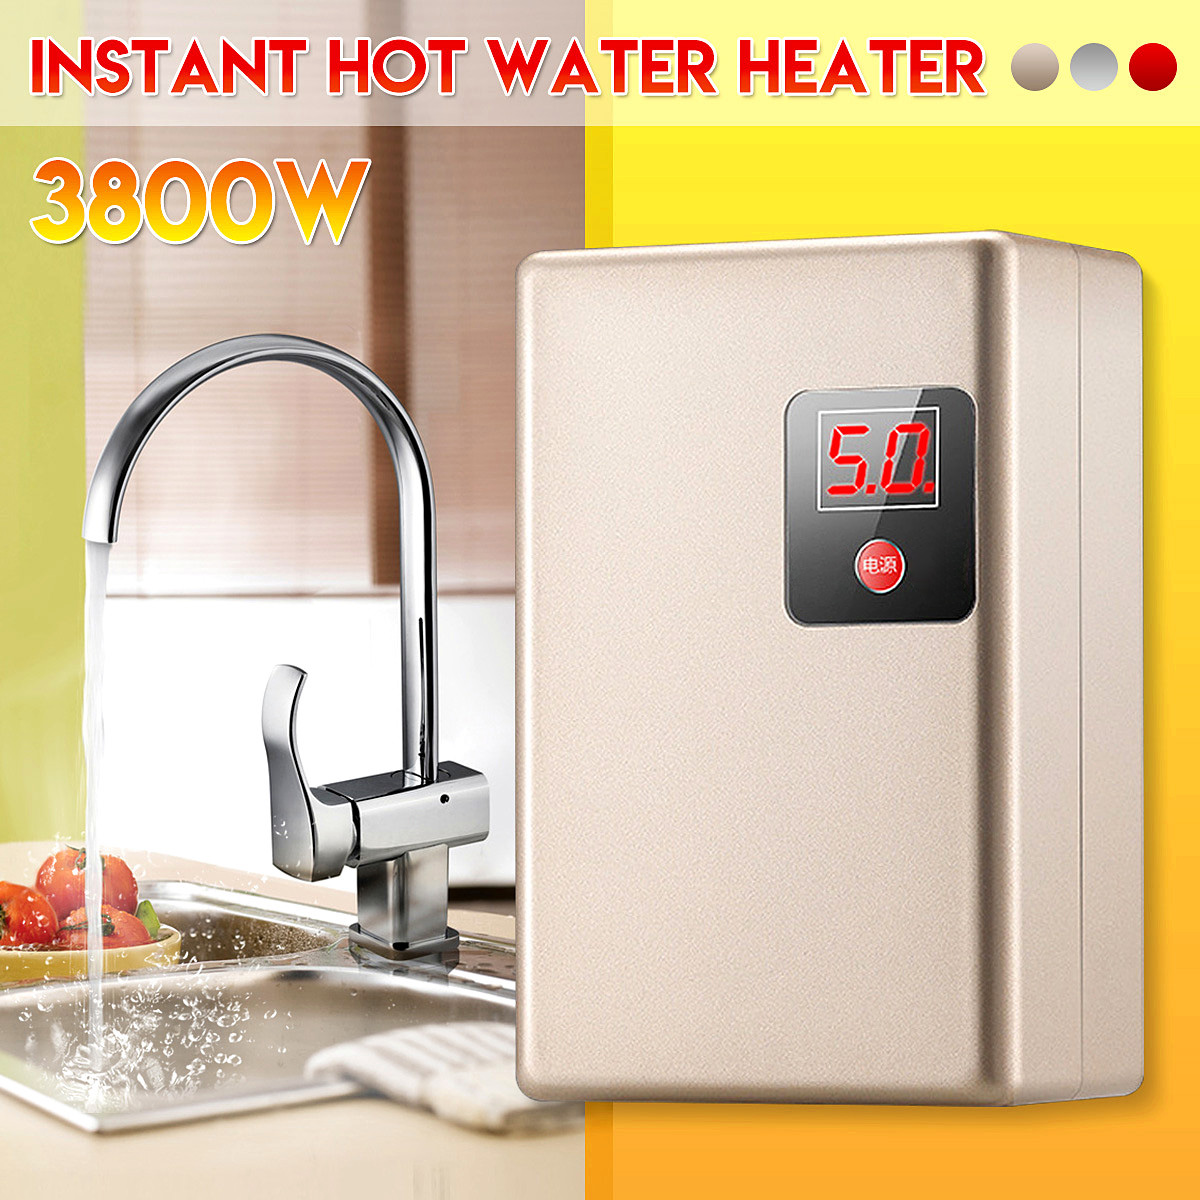 220V-3800W-Shower-Instant-Water-Heater-Tankless-Water-Heater-Electric-Heating-Instant-Hot-Water-for--1582848-1